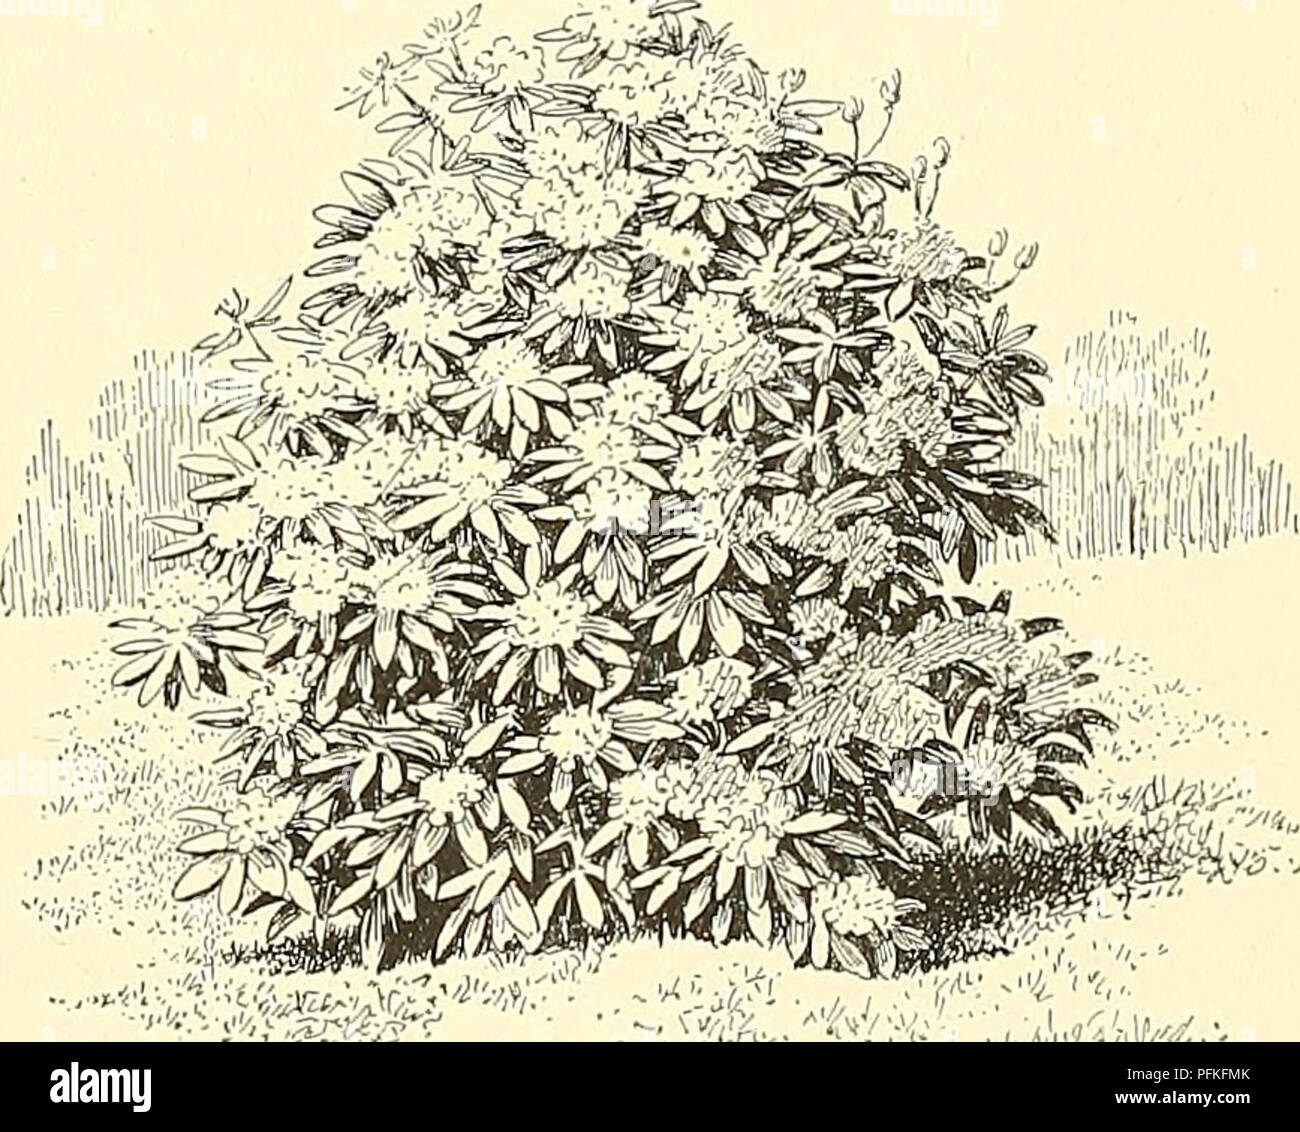 . Cyclopedia of American horticulture, comprising suggestions for cultivation of horticultural plants, descriptions of the species of fruits, vegetables, flowers, and ornamental plants sold in the United States and Canada, together with geographical and biographical sketches. Gardening. RHODODENDRON RHODODENDRON 1517 not contain limestone or heavy clay and lias a moist and fx-esh subsoil will prove satisfactory. Where limestone or heavy clay prevails, beds must be specially prepared and filled vfith suitable soil. They should be at least 2 to 3 ft. deep, or deeper where the subsoil is not poro Stock Photo